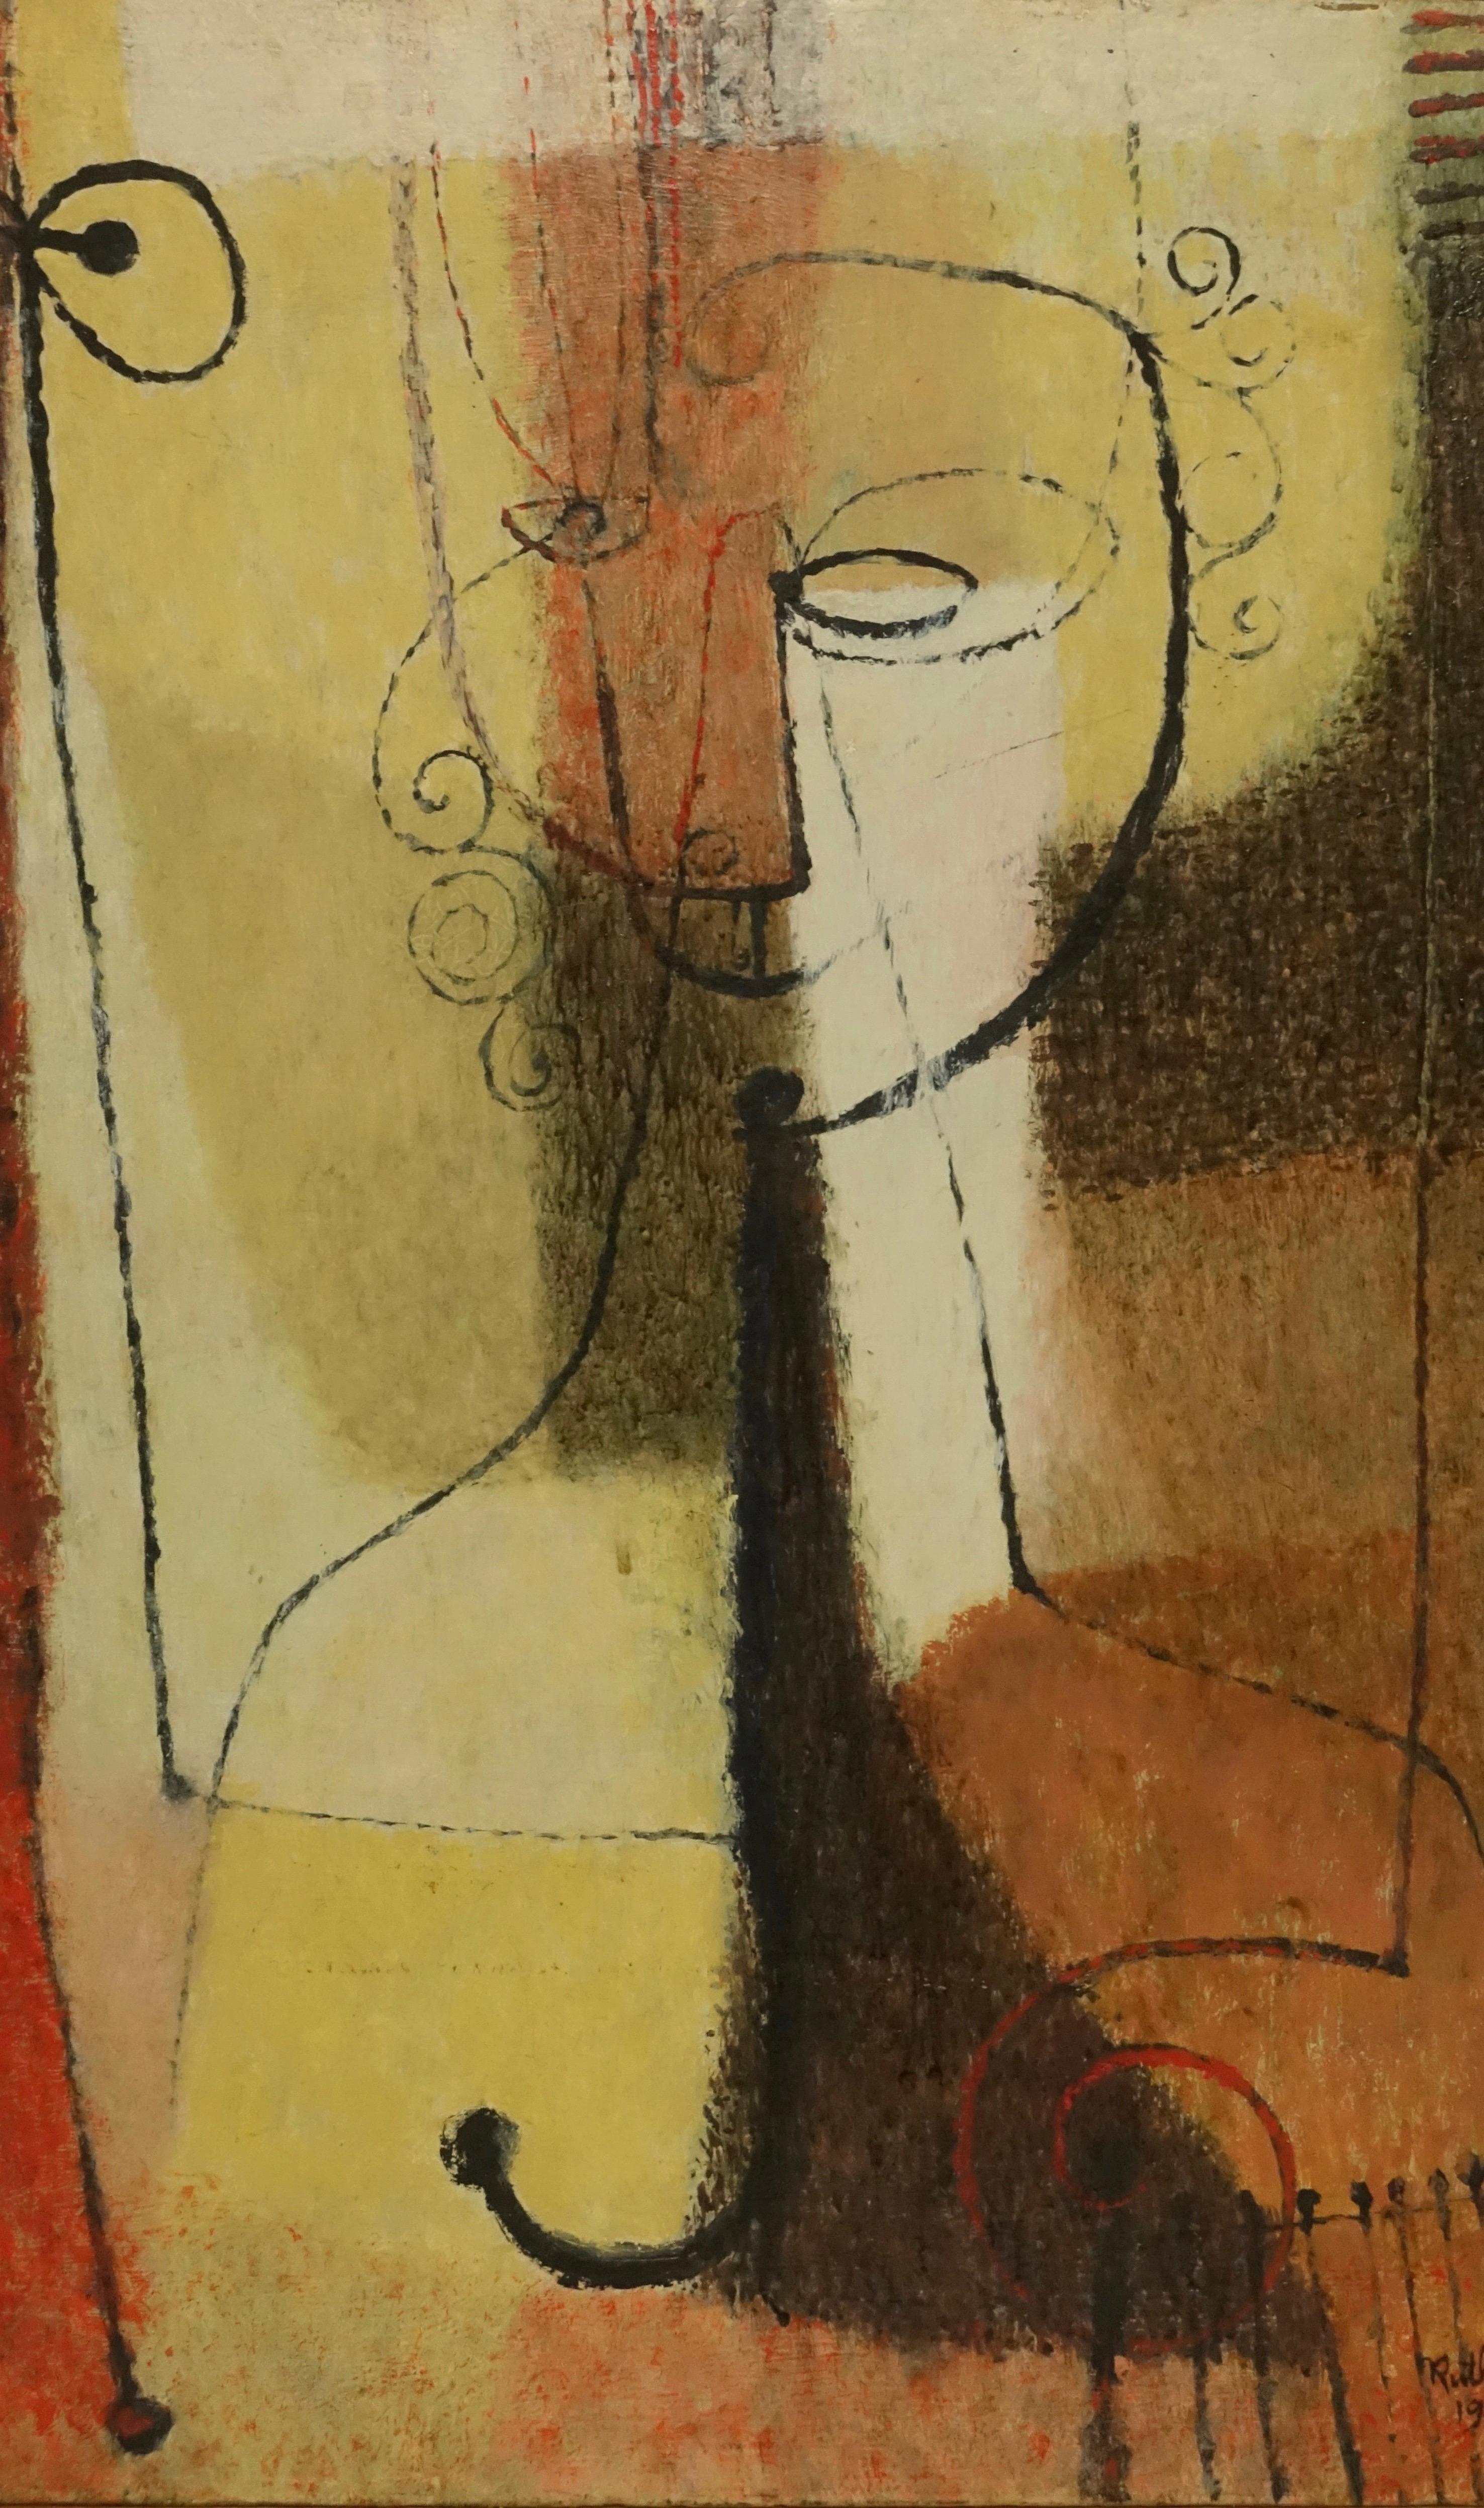 Abstract portrait of a woman, oil on canvas, in original simple wood frame. Signed and dated, Ruth Jalovick, 1951.